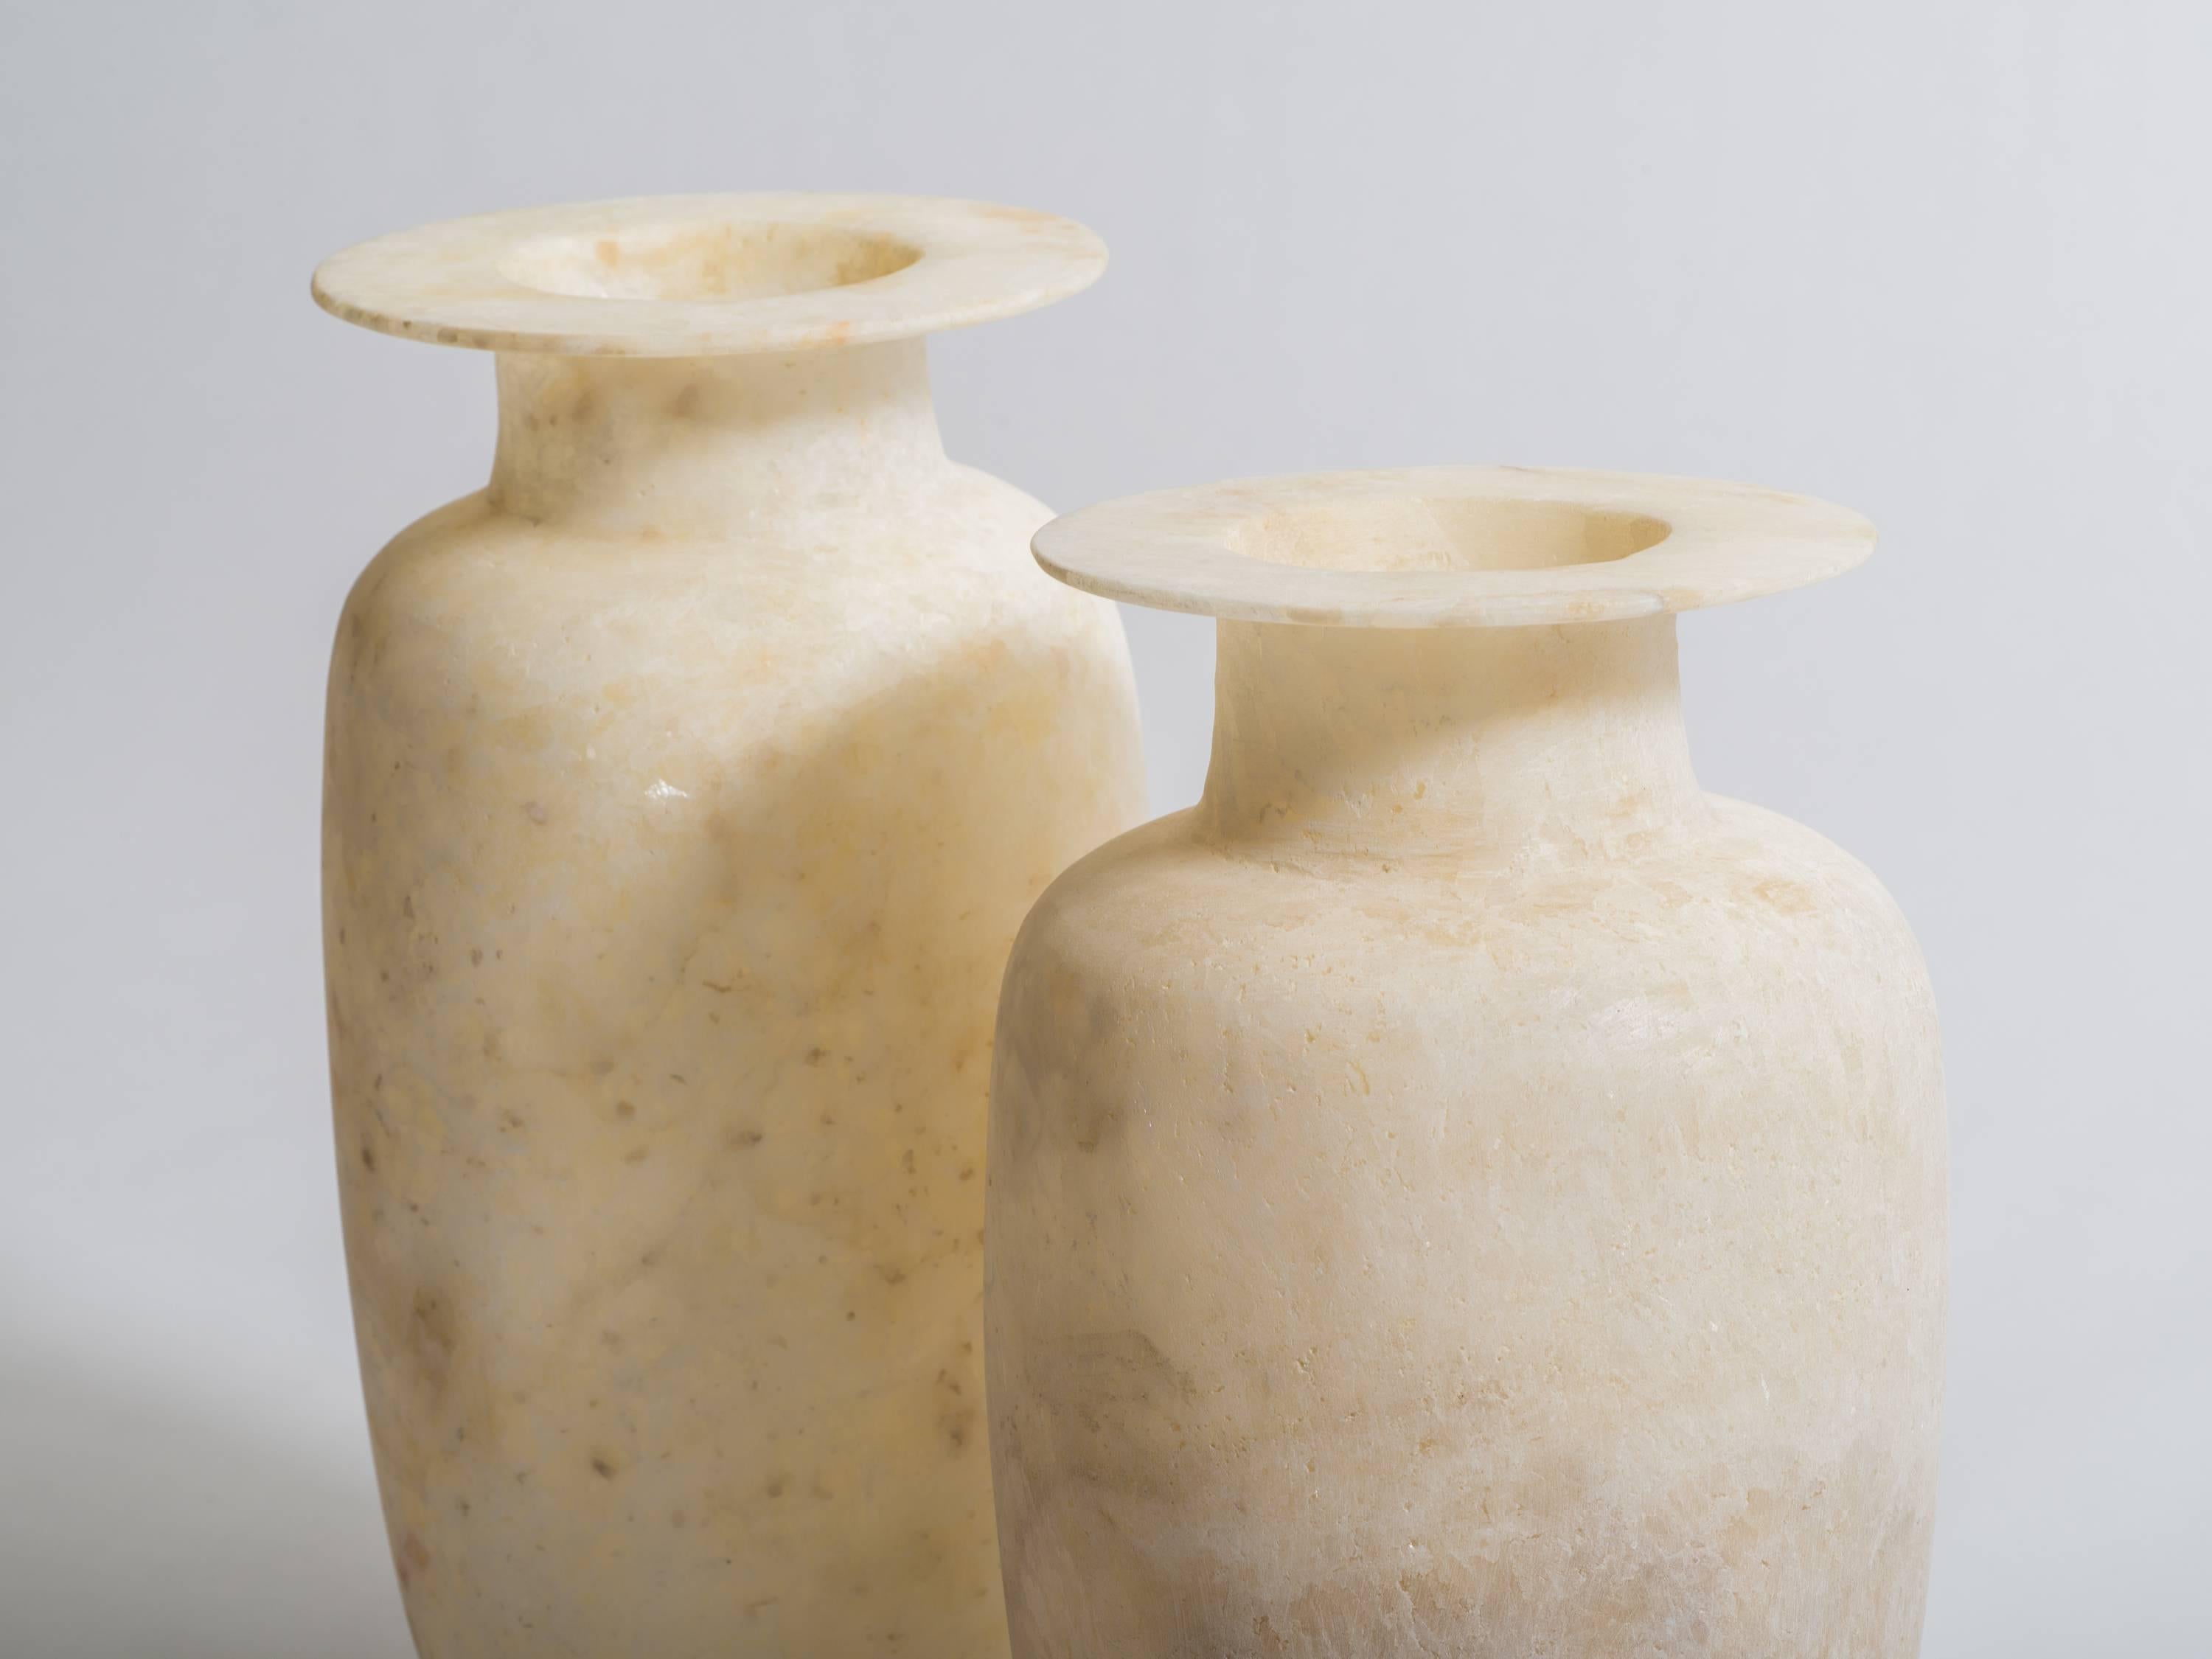 Pair of tall Egyptian alabaster ovoid urn vases with wide rimmed tops. Exquisitely hand-carved, the natural gypsum alabaster is milky white with natural veining. Tallest vase measures 17 inches height x 9.5 inches diameter. Second vase measures